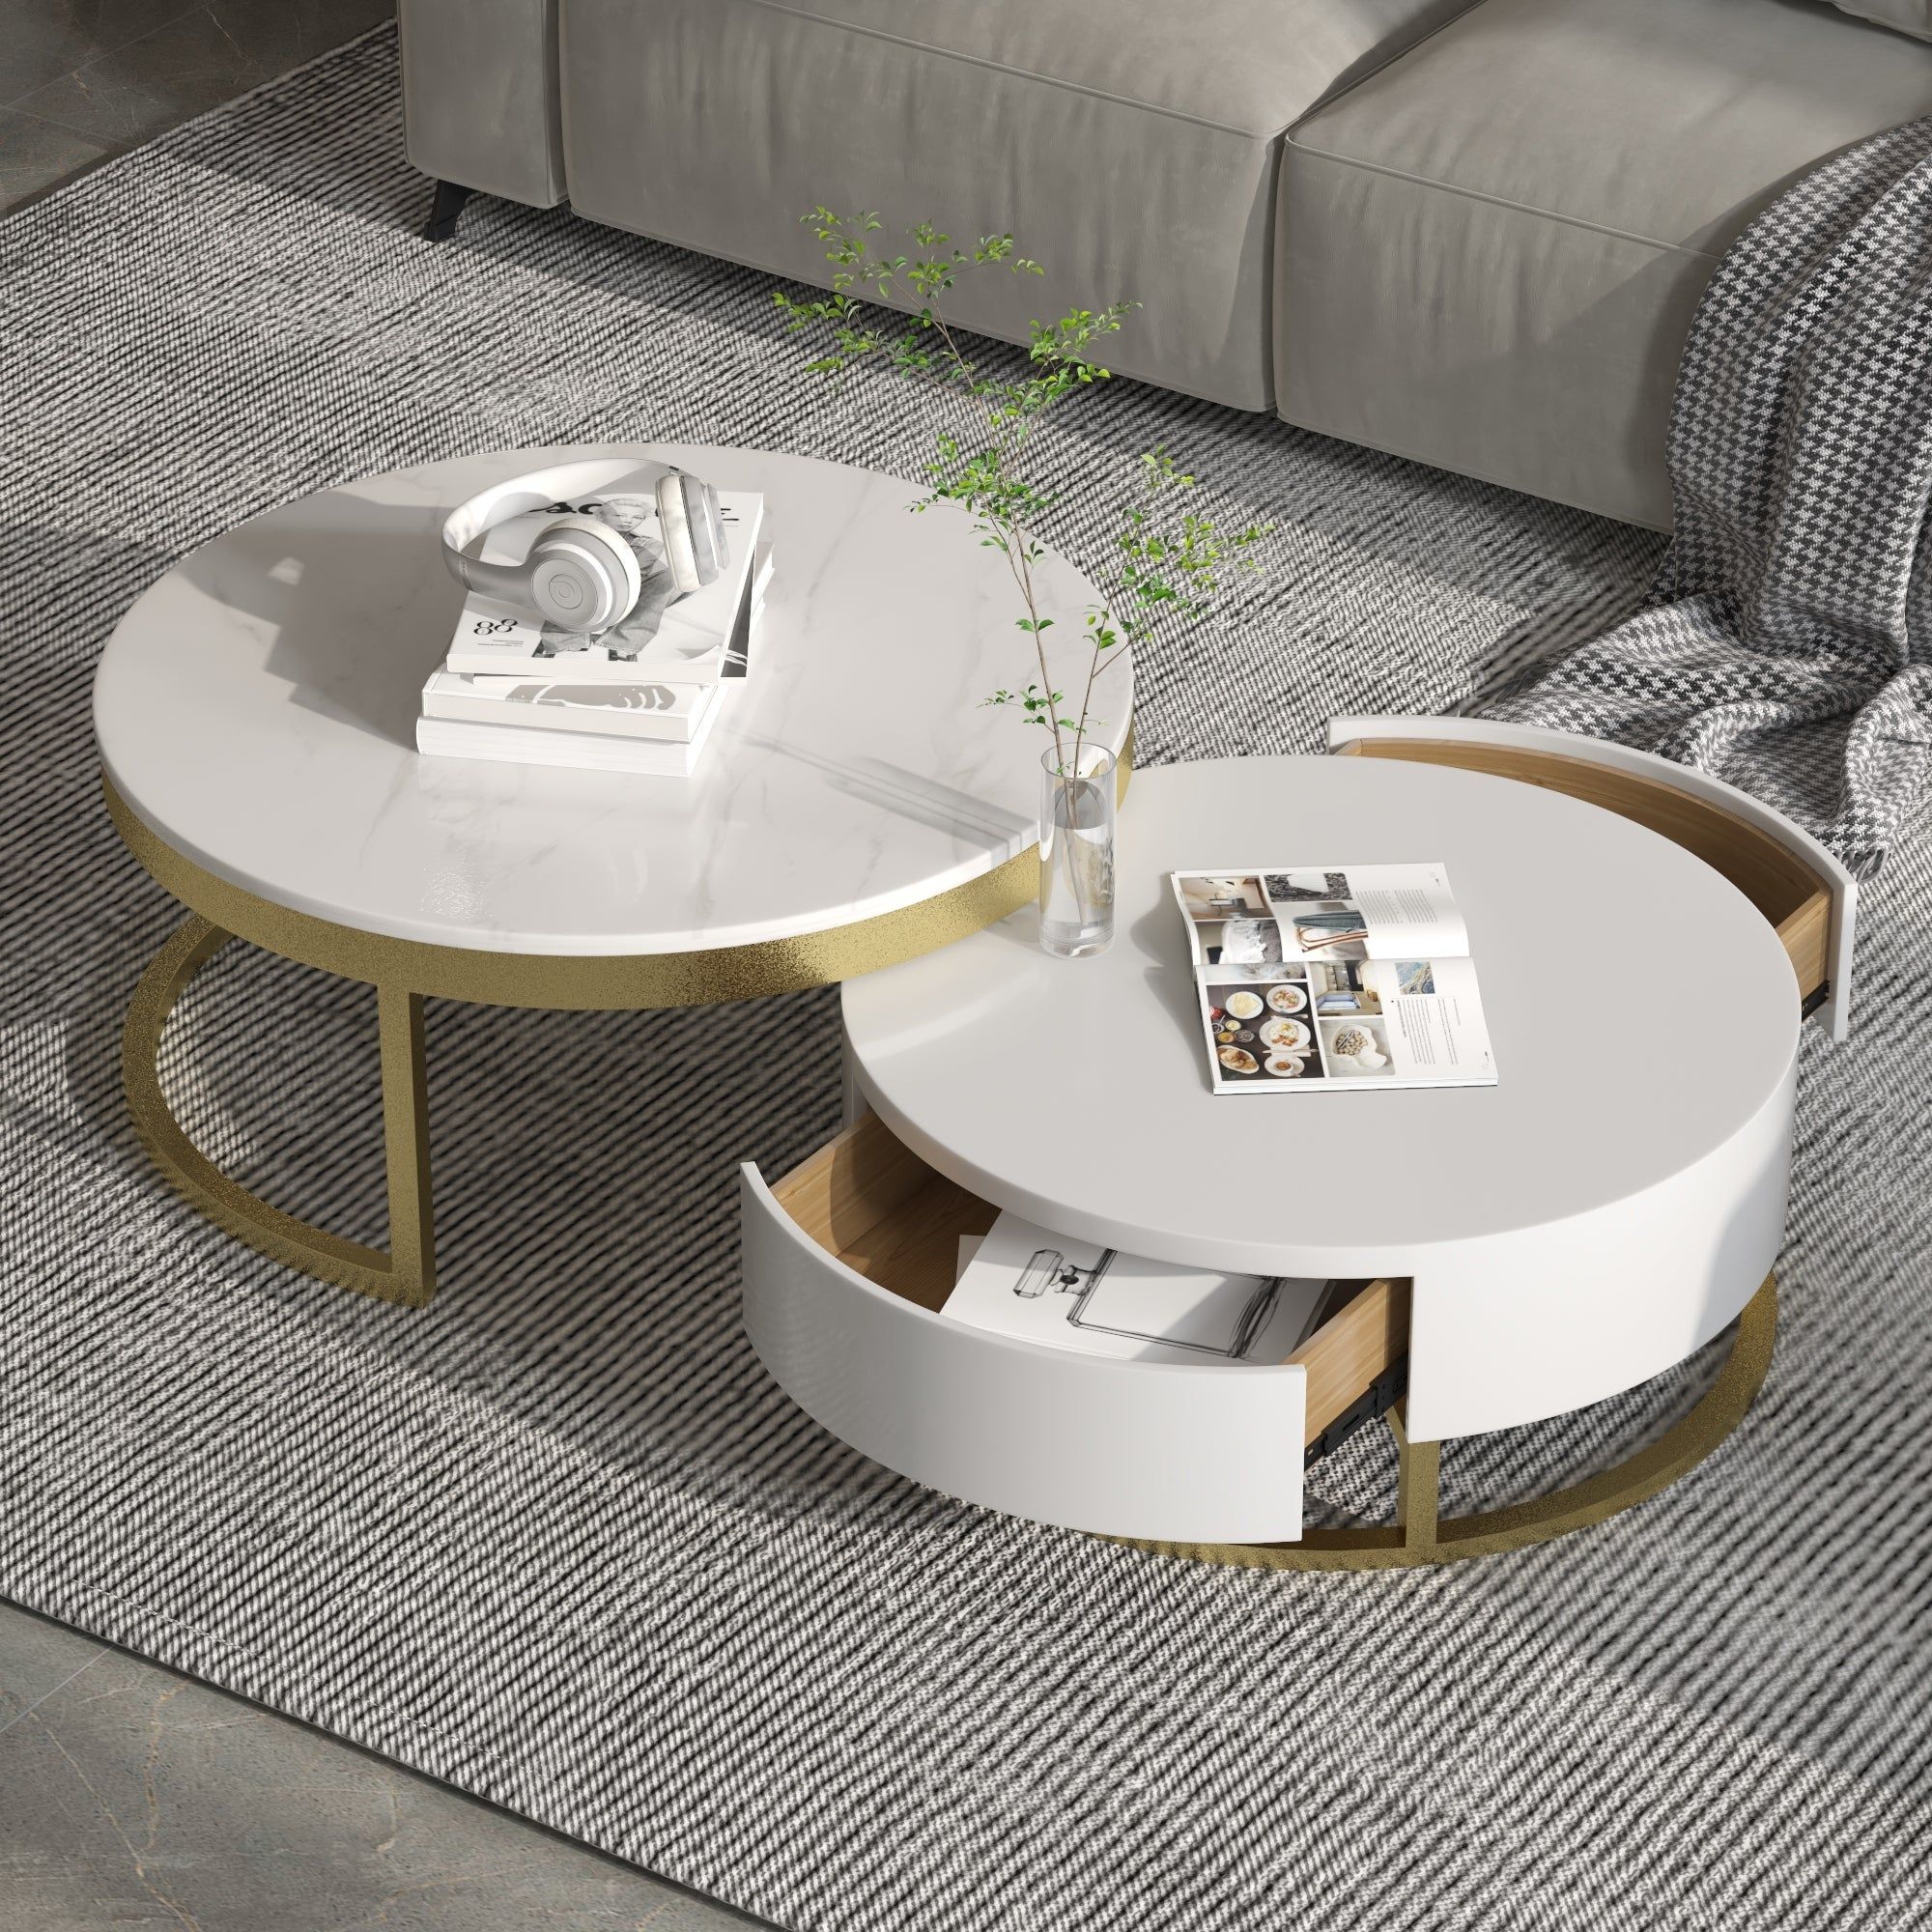 Marble Top Round Modern Swivel Coffee Table With Storage Of 2 Drawers And  Metal Legs – On Sale – Overstock – 35219180 Regarding Faux Marble Top Coffee Tables (View 14 of 20)